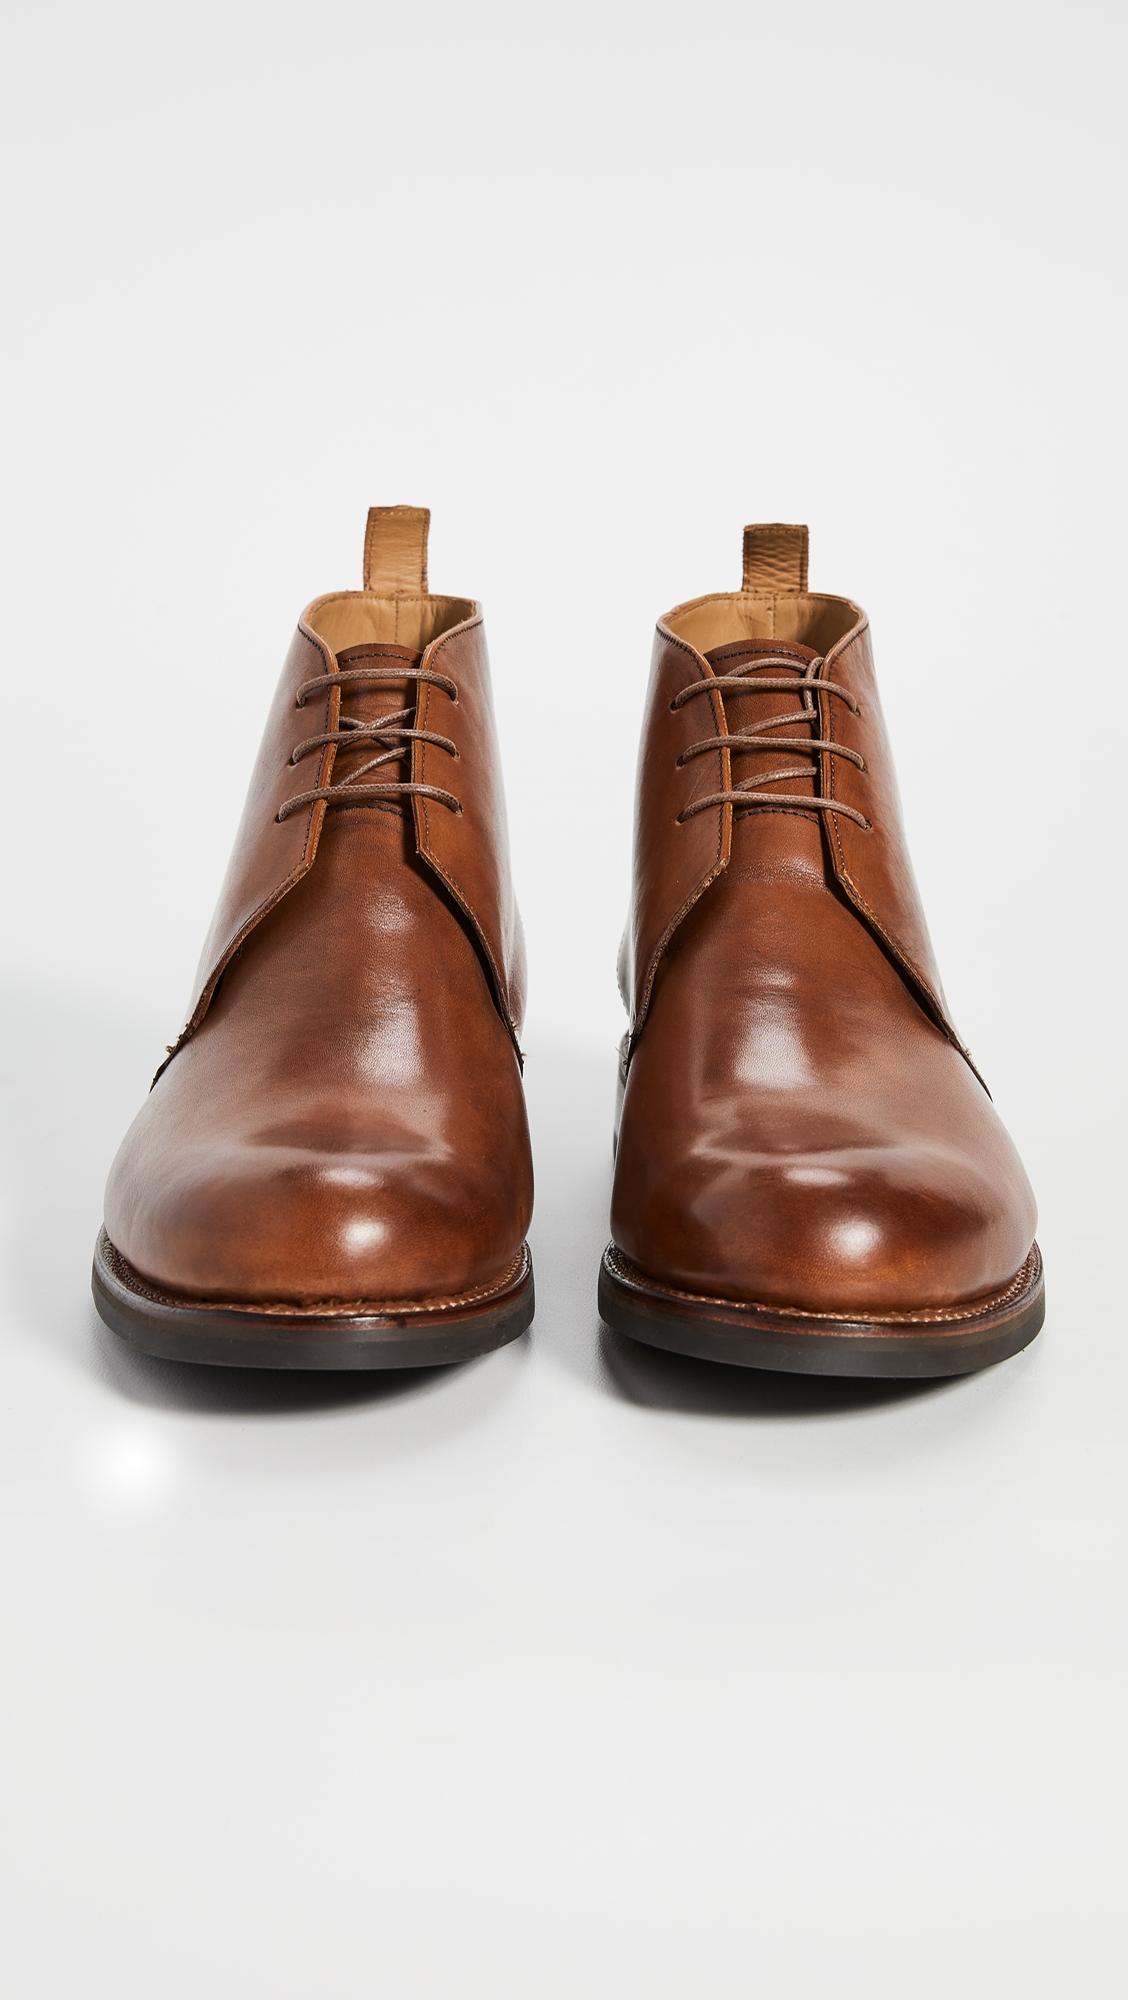 Grenson Leather Wendell Boots in Tan 